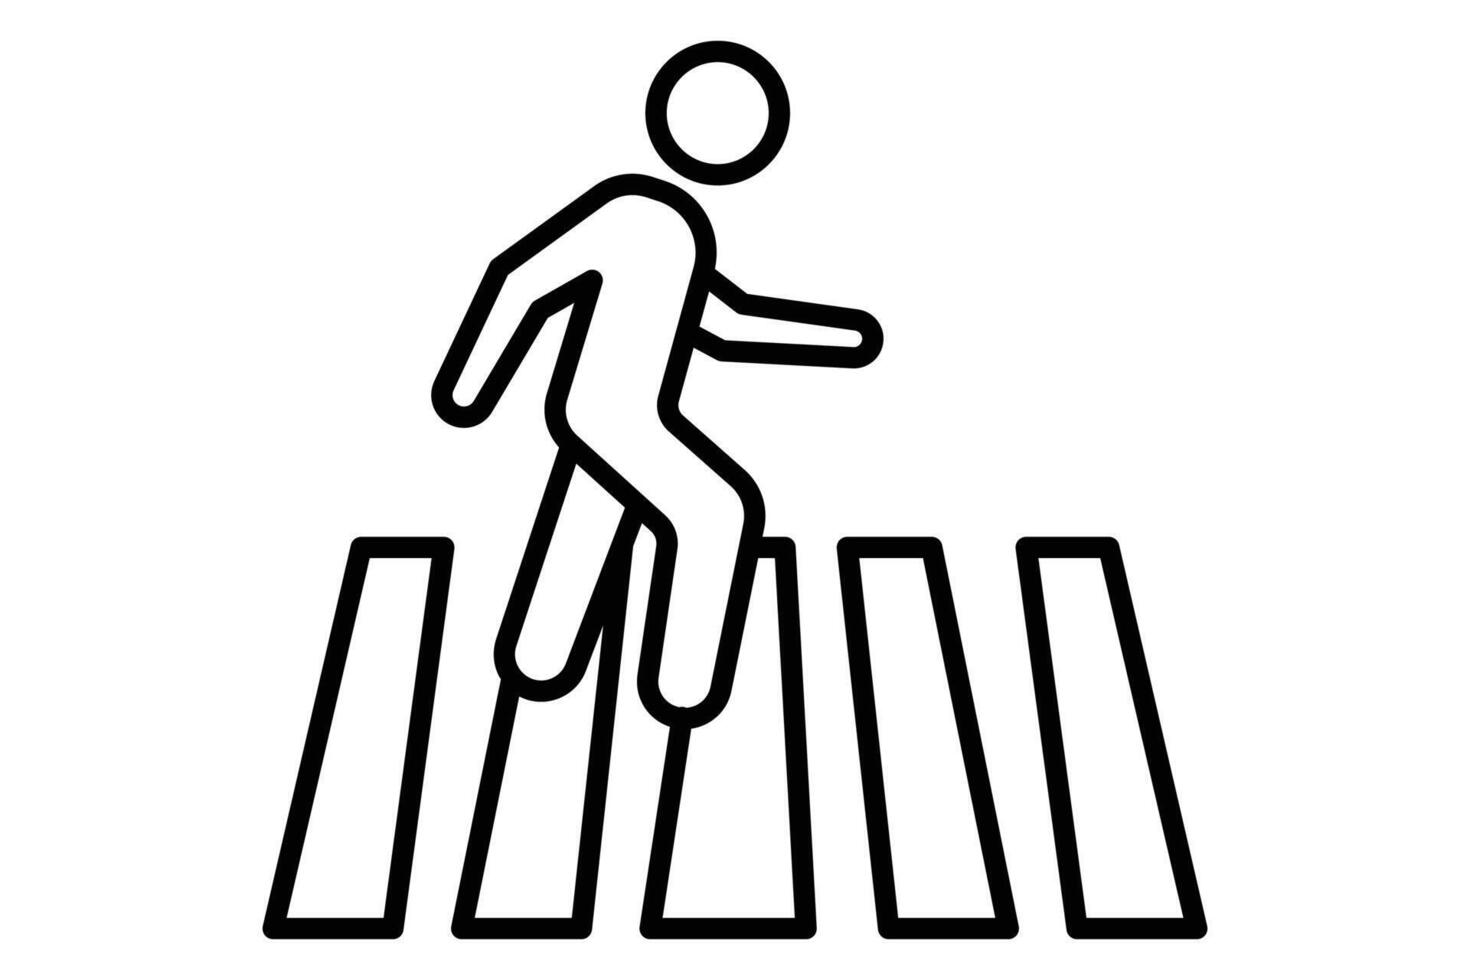 Pedestrian Crossing icon. icon related to pedestrian pathways, public navigation. line icon style. element illustration vector